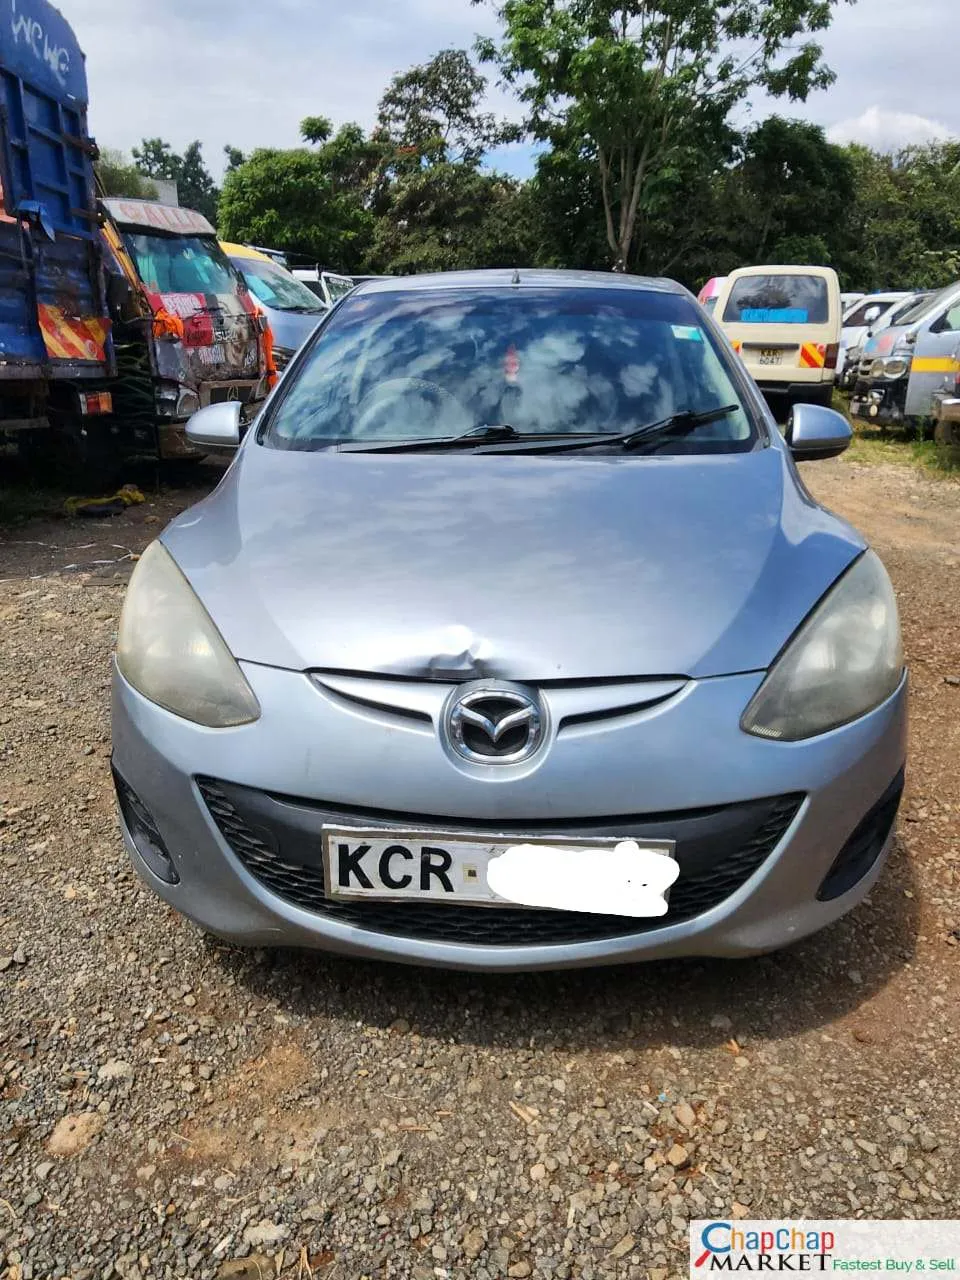 Mazda Demio QUICK SALE 🔥 You Pay 30% DEPOSIT TRADE IN OK EXCLUSIVE Hire purchase installments Kenya